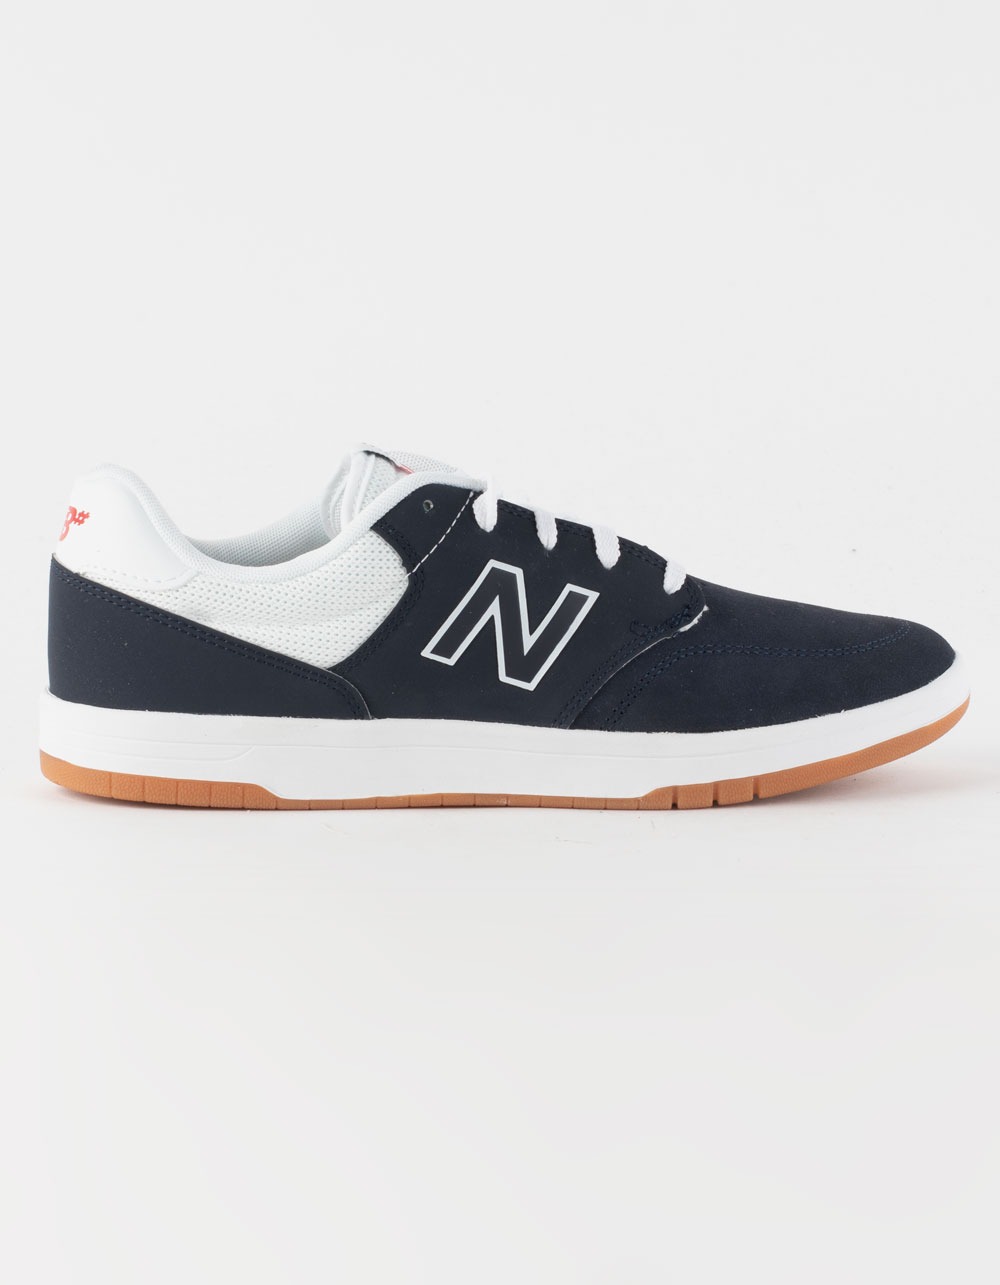 NEW BALANCE 425 Mens Shoes - NAVY/WHITE | Tillys